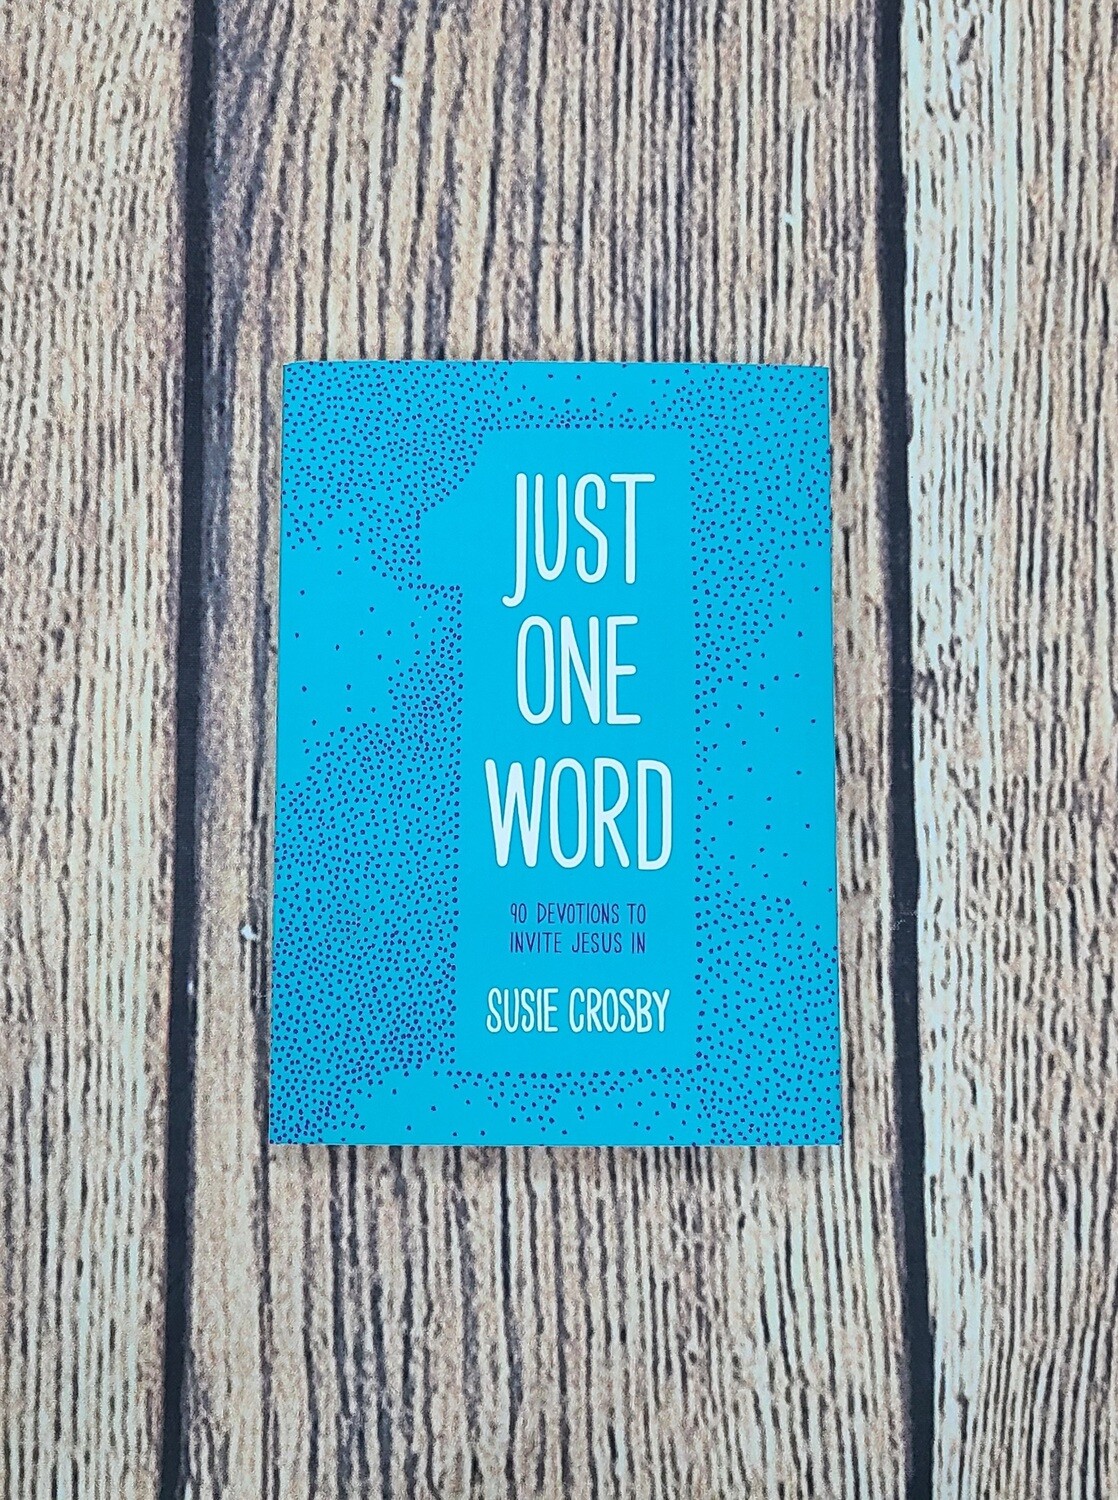 Just One Word by Susie Crosby